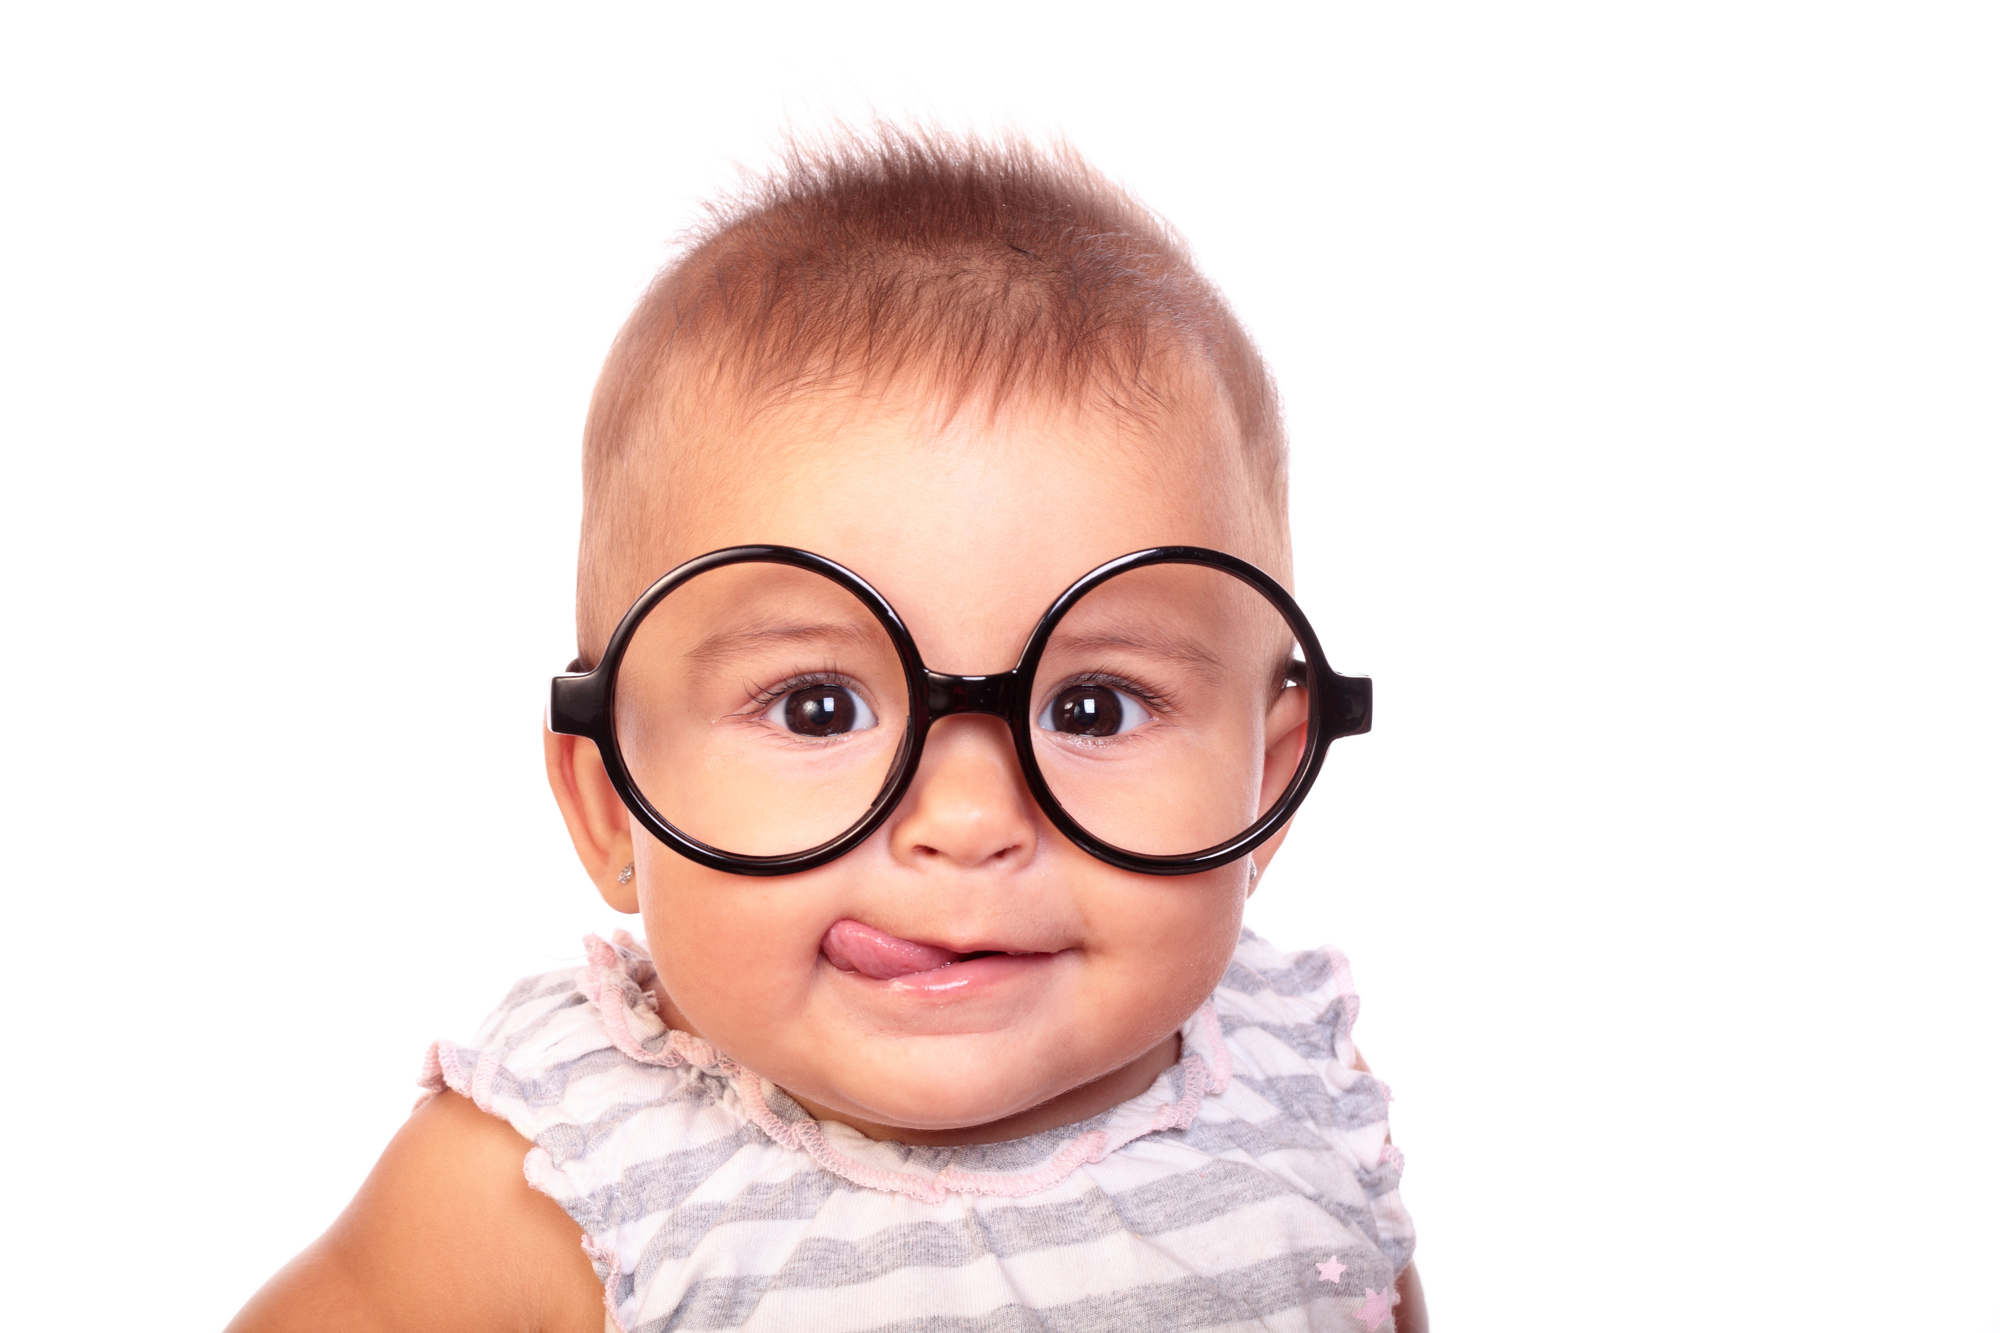 Does Your Child Need Glasses